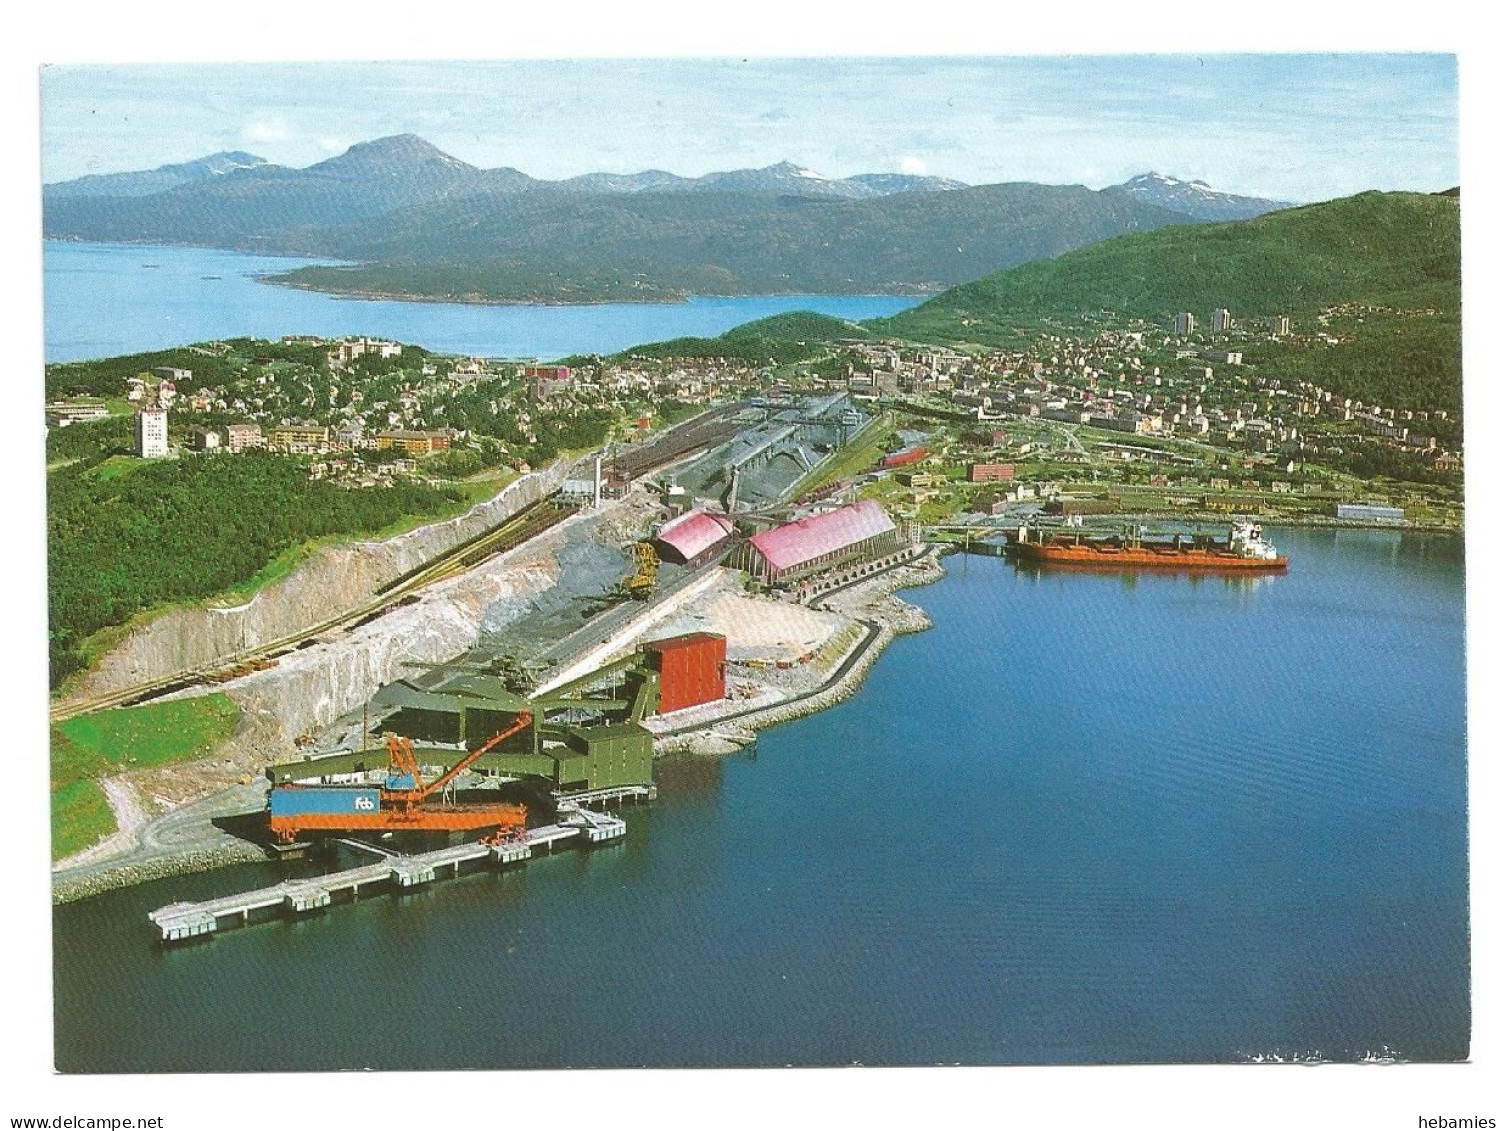 BULK CARRIER In An ORE HARBOR - NARVIK - NORWAY - NORGE - - Norway